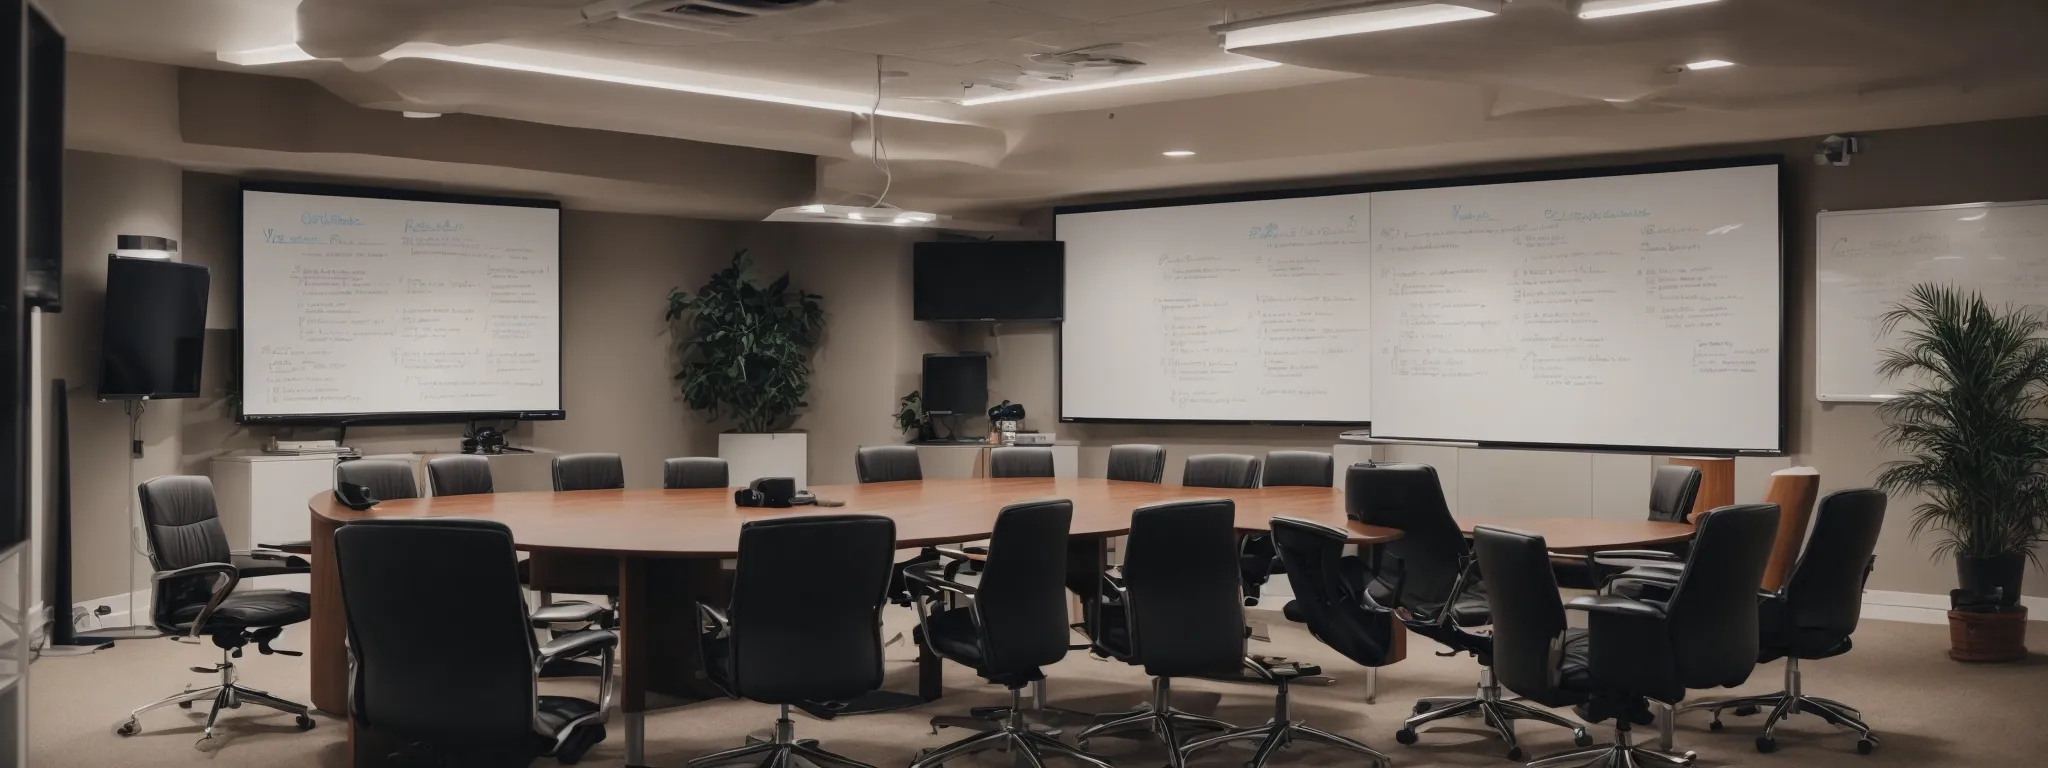 a conference room with a whiteboard illustrating seo strategies and objectives.